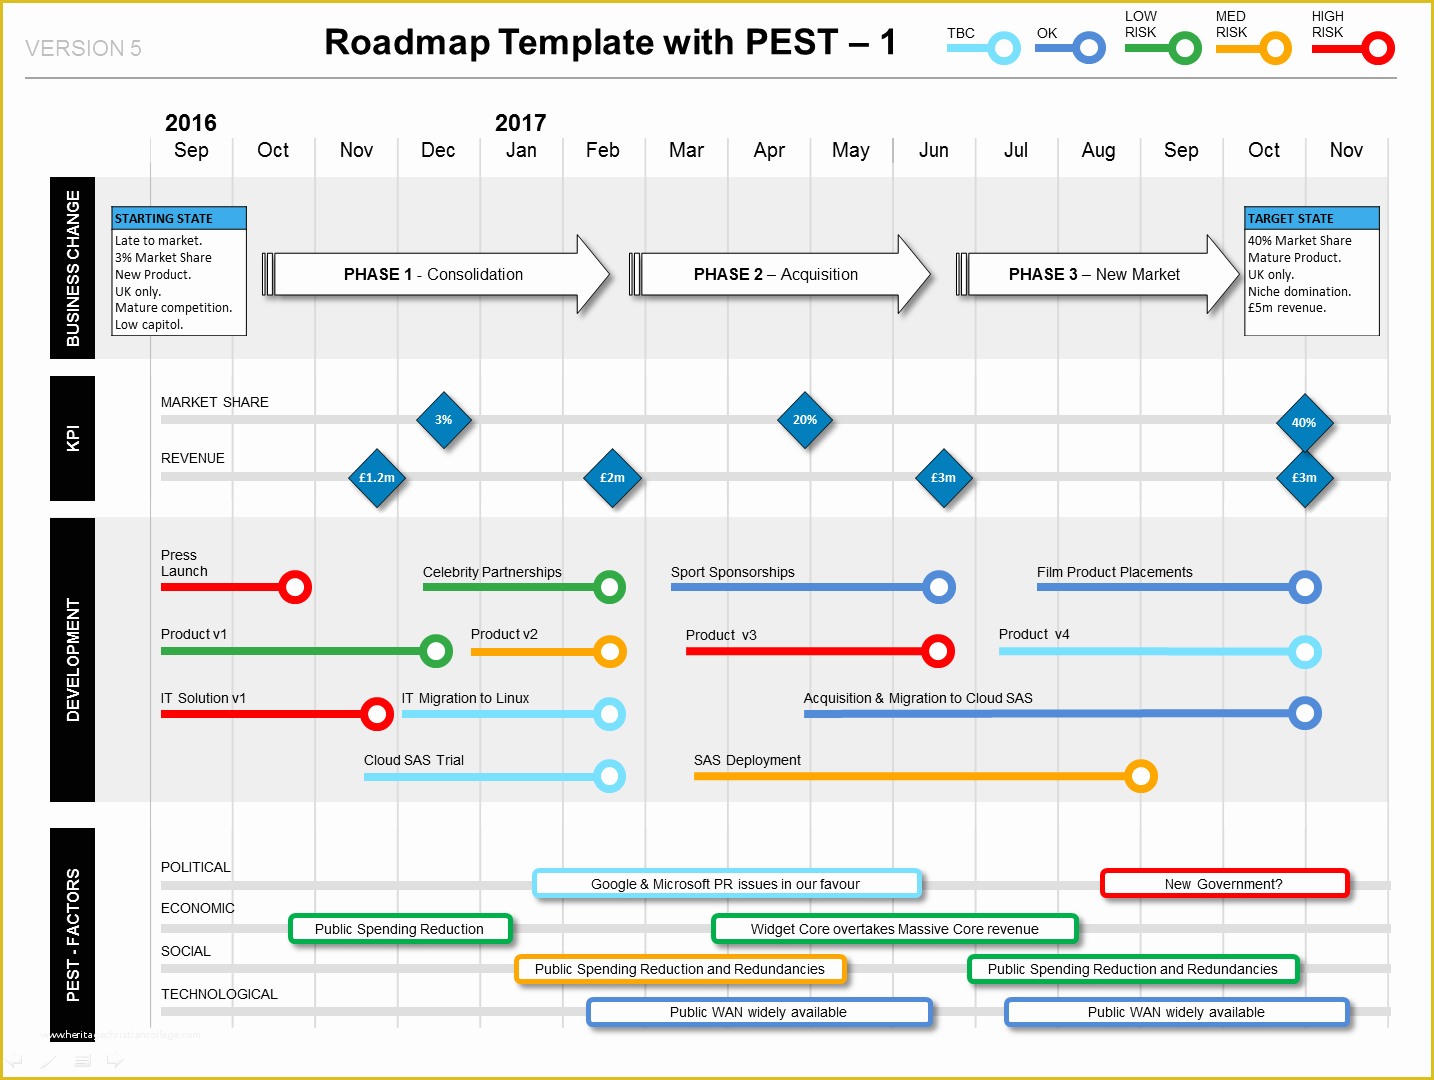 Project Management Roadmap Template Free Of Roadmap with Pest Factors Phases Kpis & Milestones Ppt